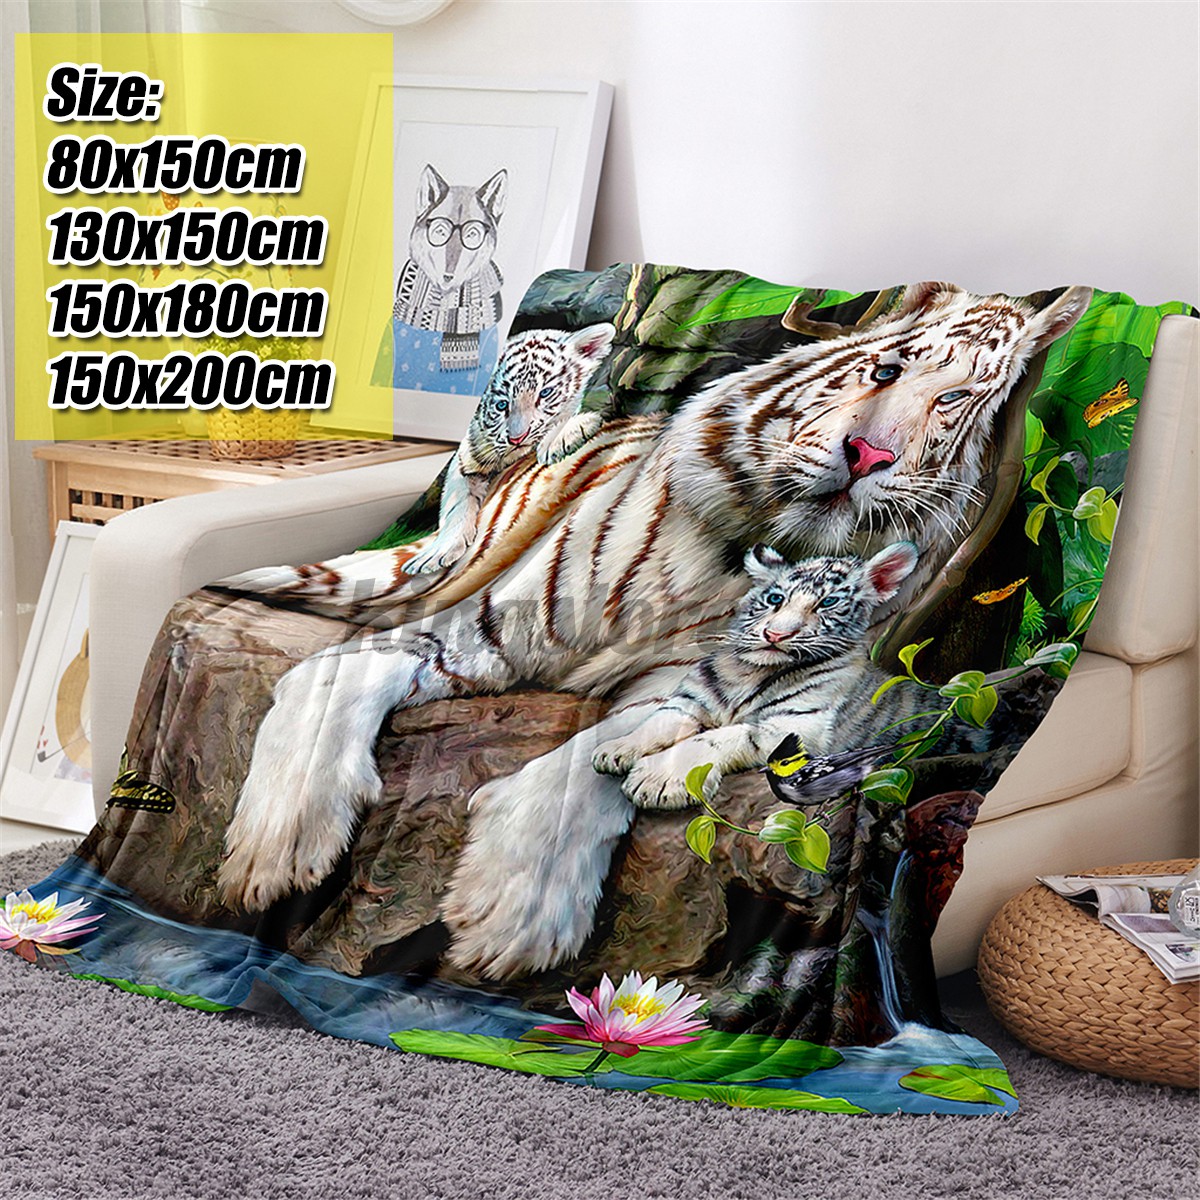 200x150cm Fashion 3D Tiger Printing Plush Fleece Blanket Quilts Bedding Home Office Washable Blanket